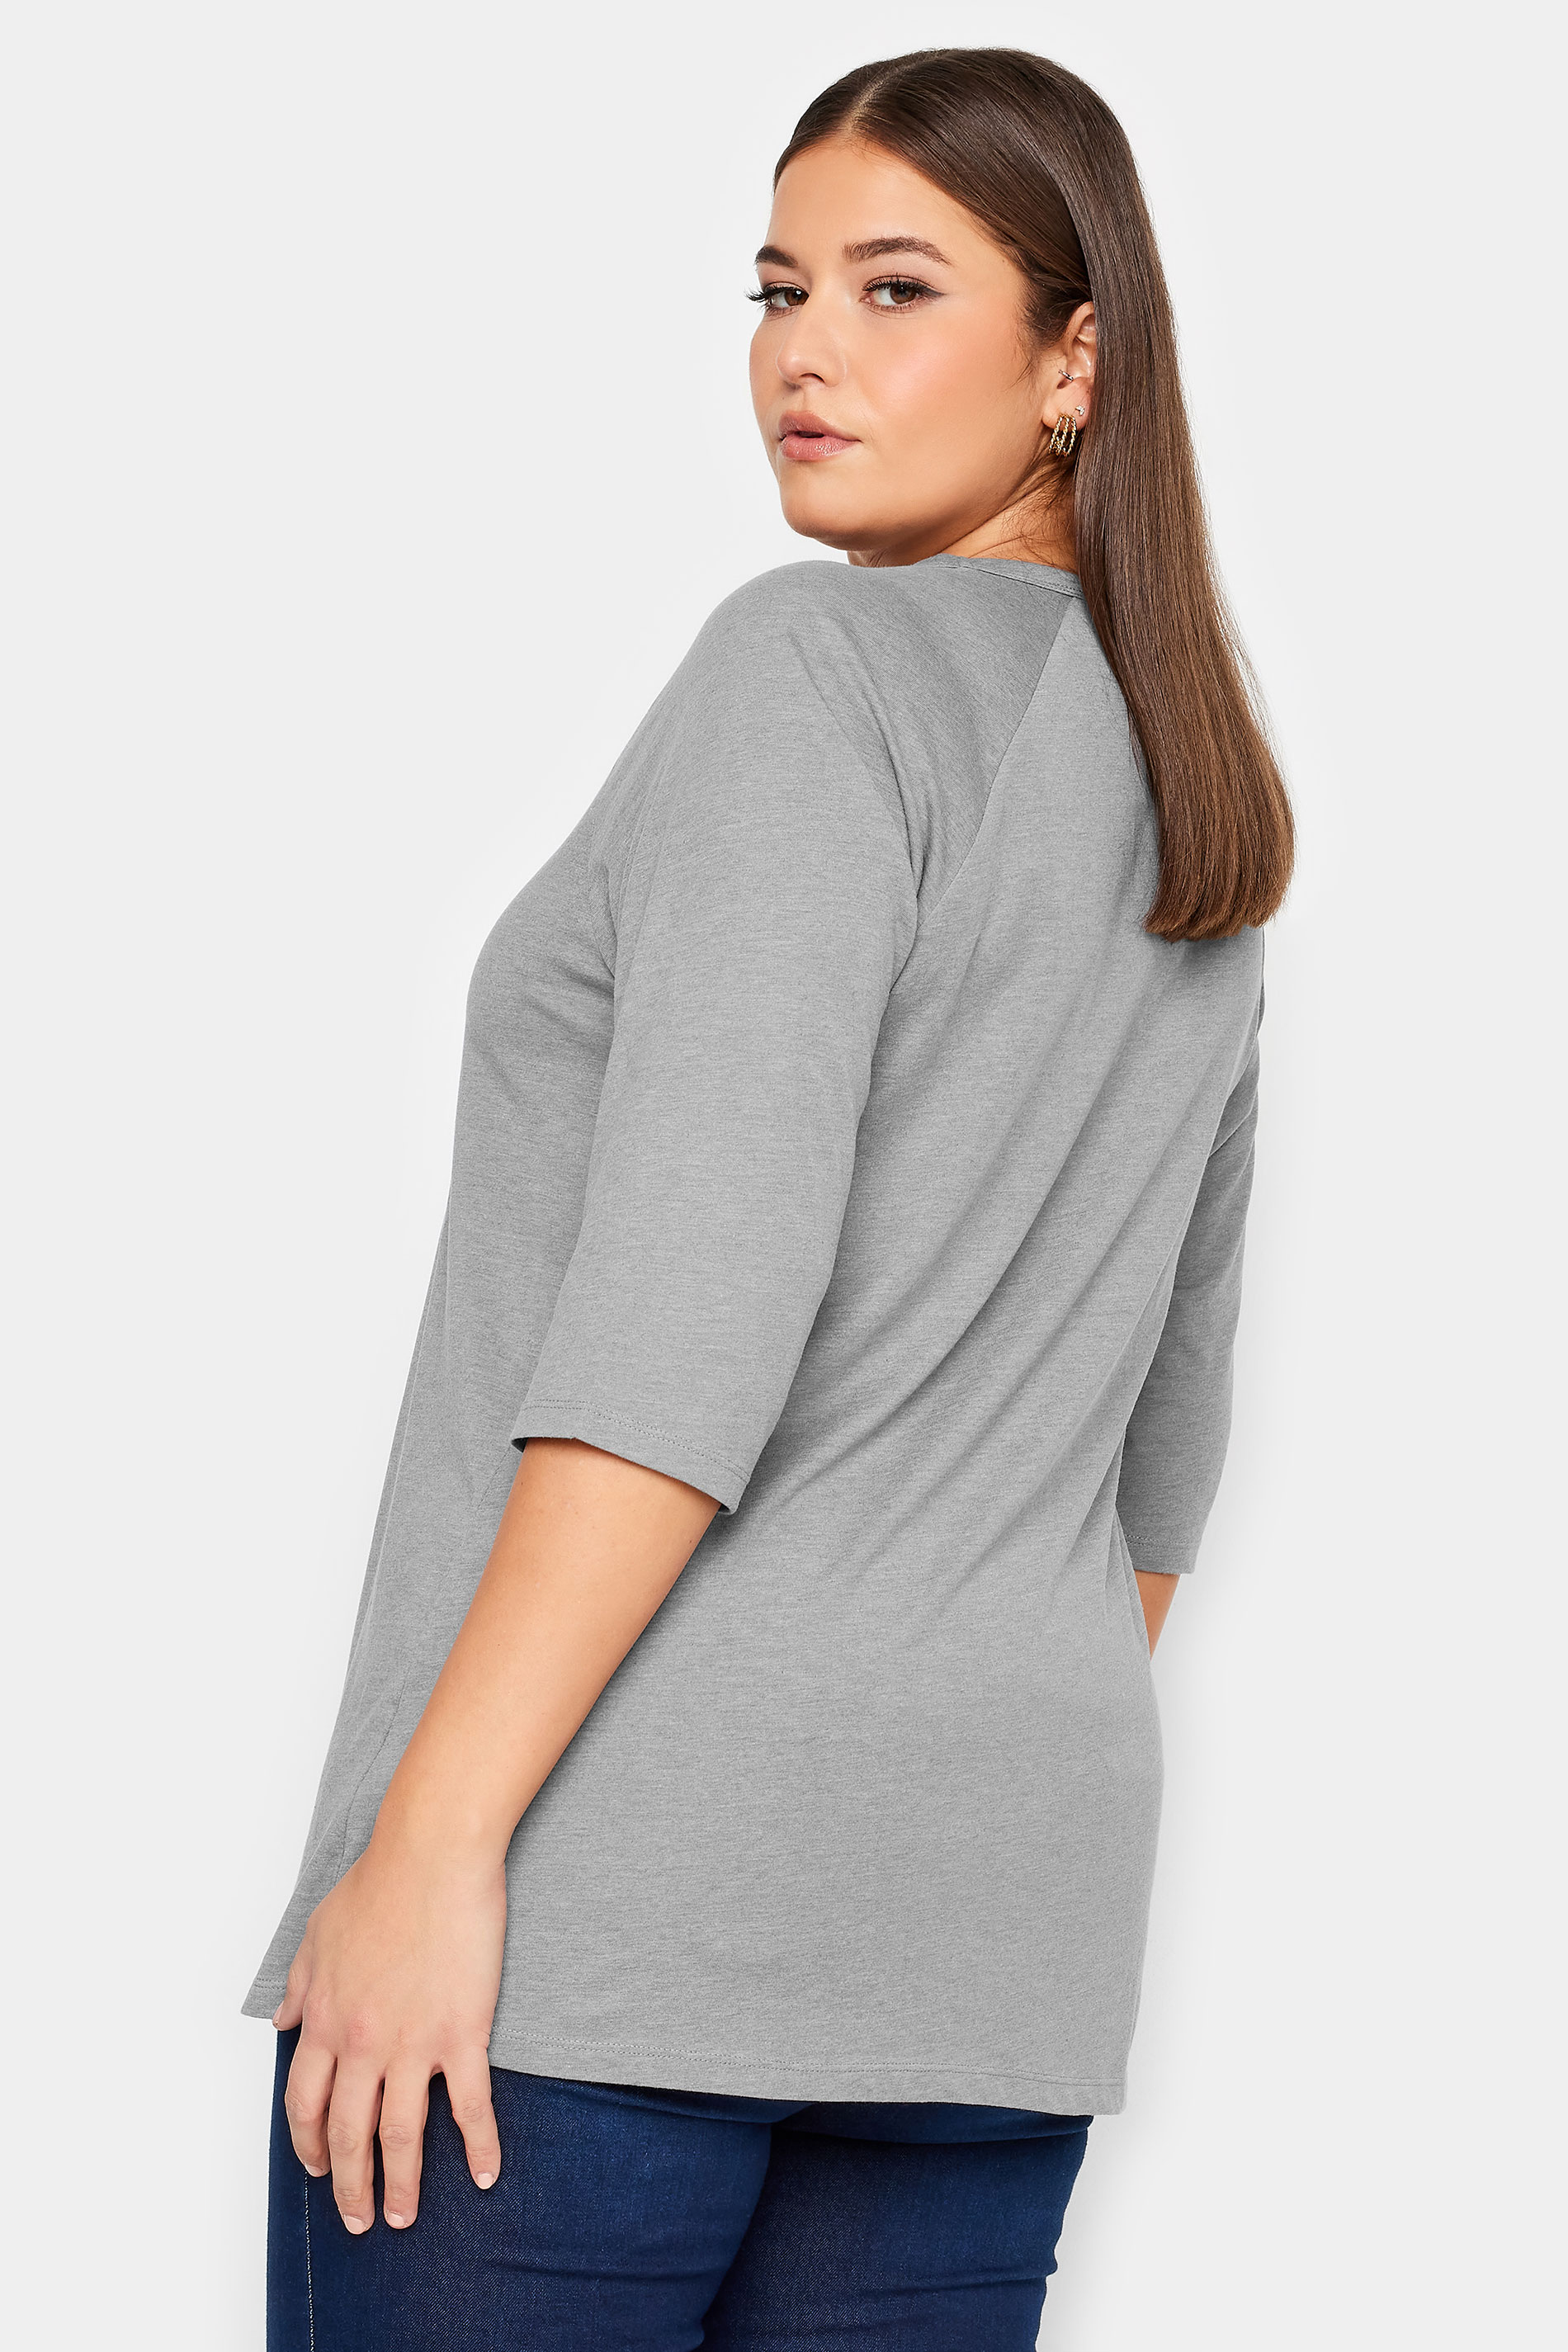 YOURS Plus Size Light Grey Lace Up Eyelet Top | Yours Clothing 3